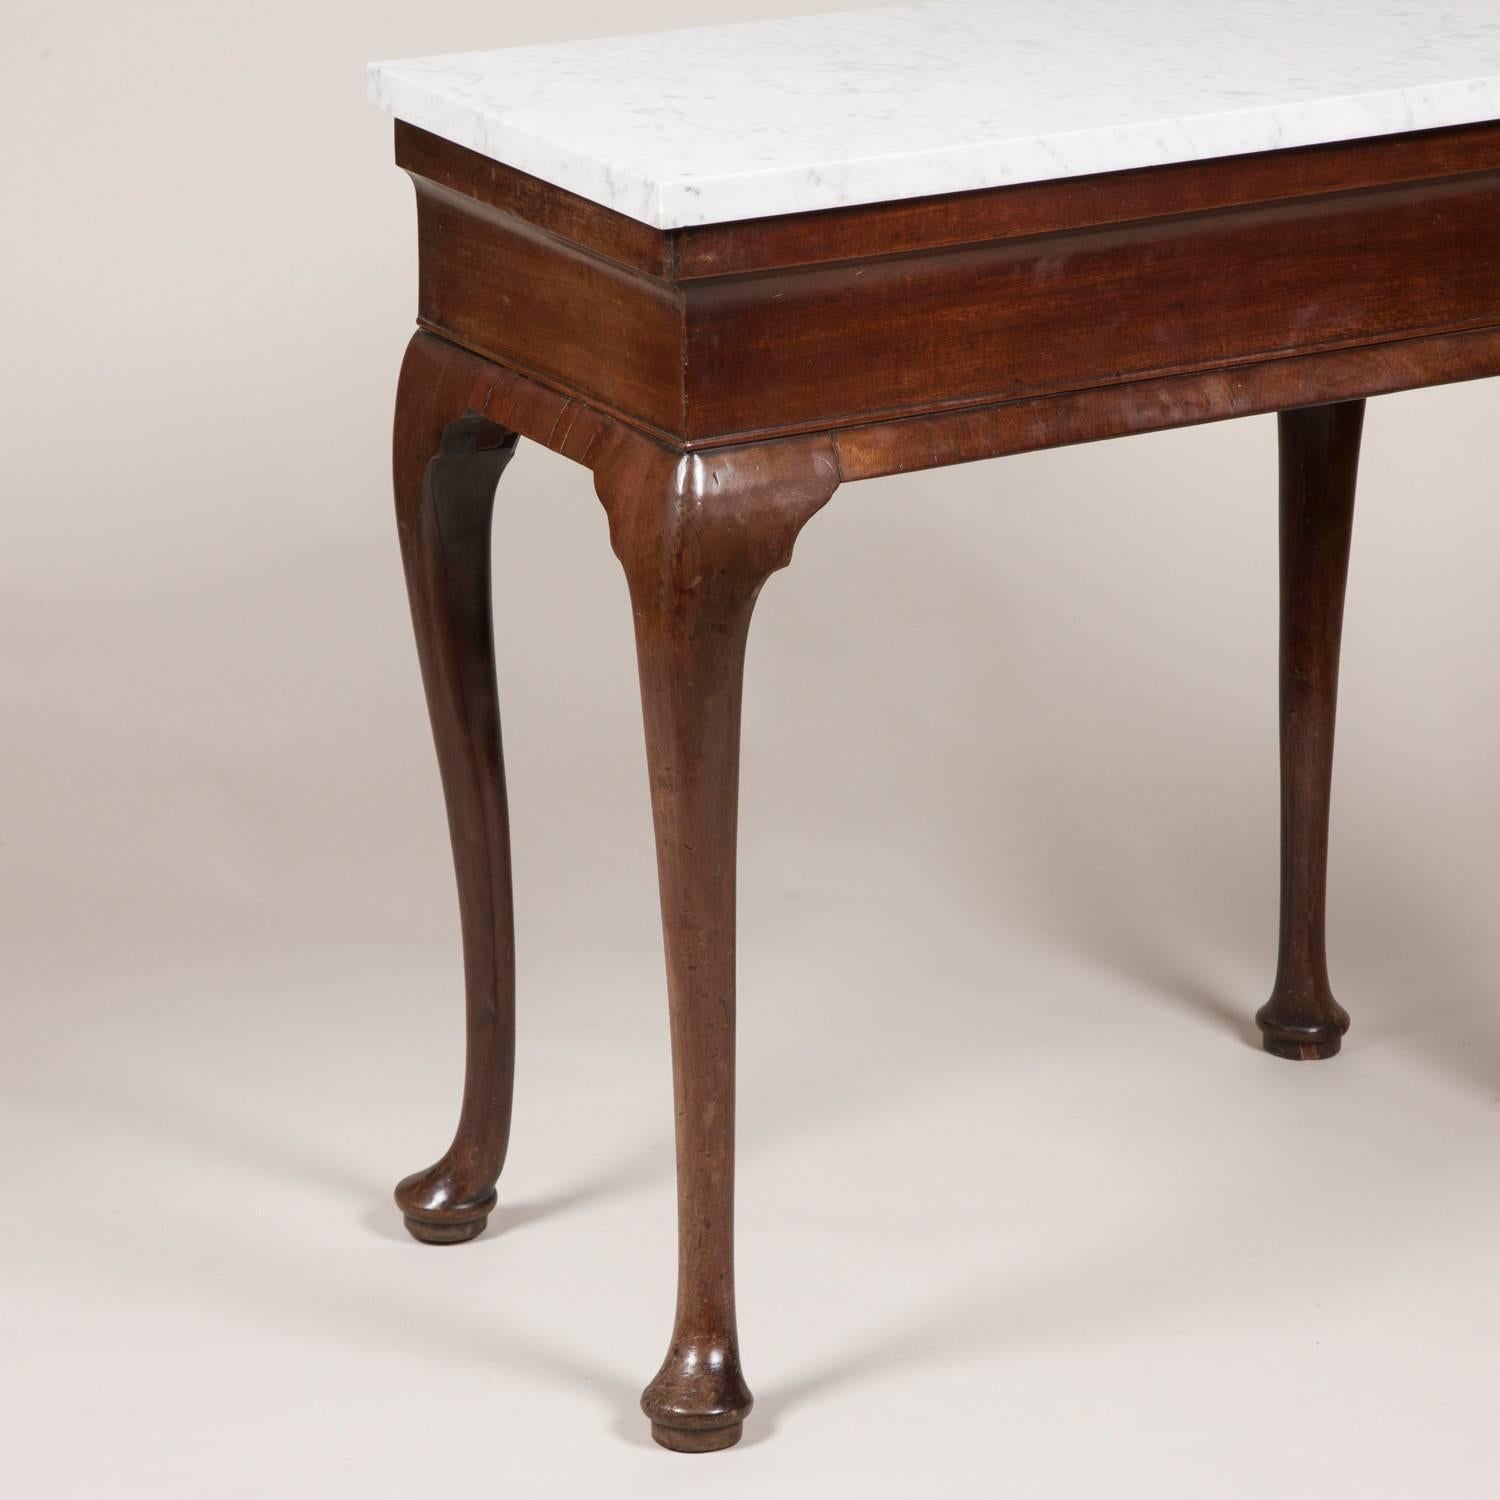 An unusual George II mahogany side table, circa 1750 with tapering veined Carrara marble top and cabriole legs.